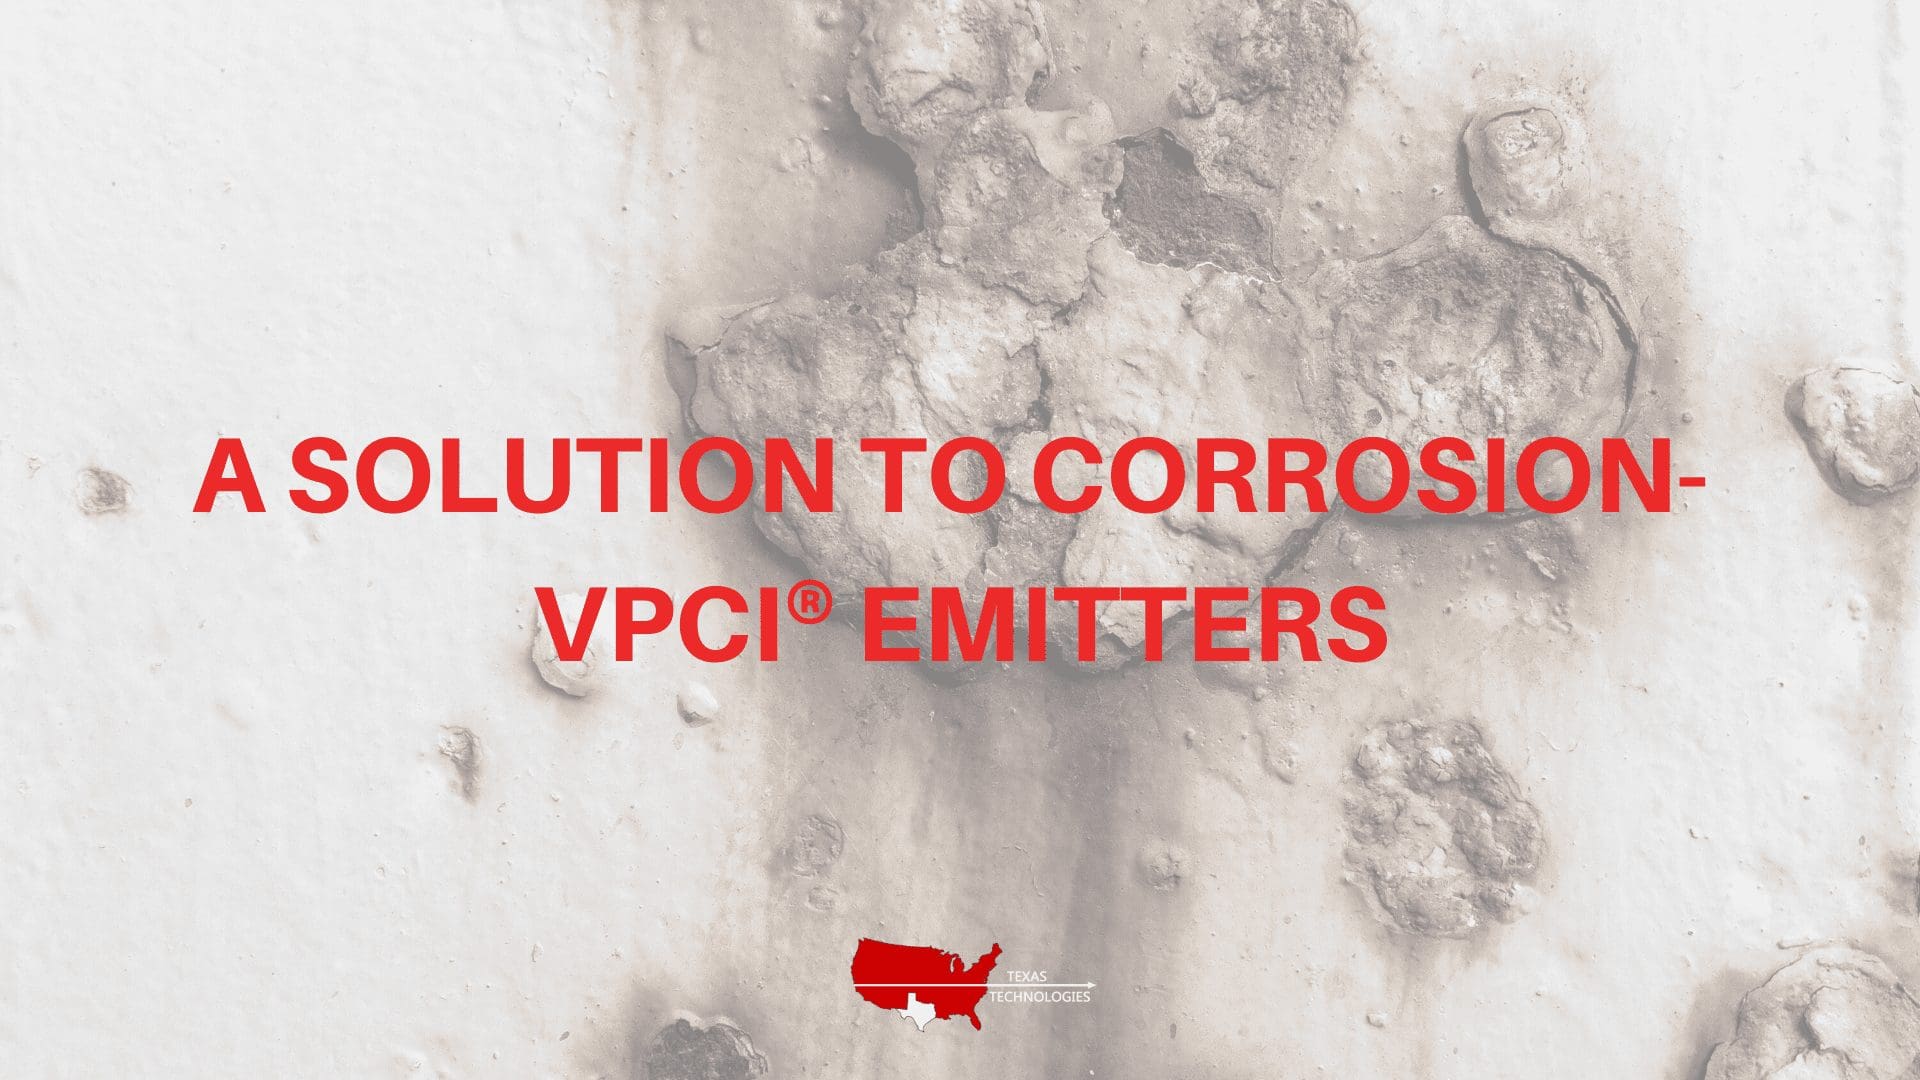 A Solution to Corrosion- VpCI® Emitters